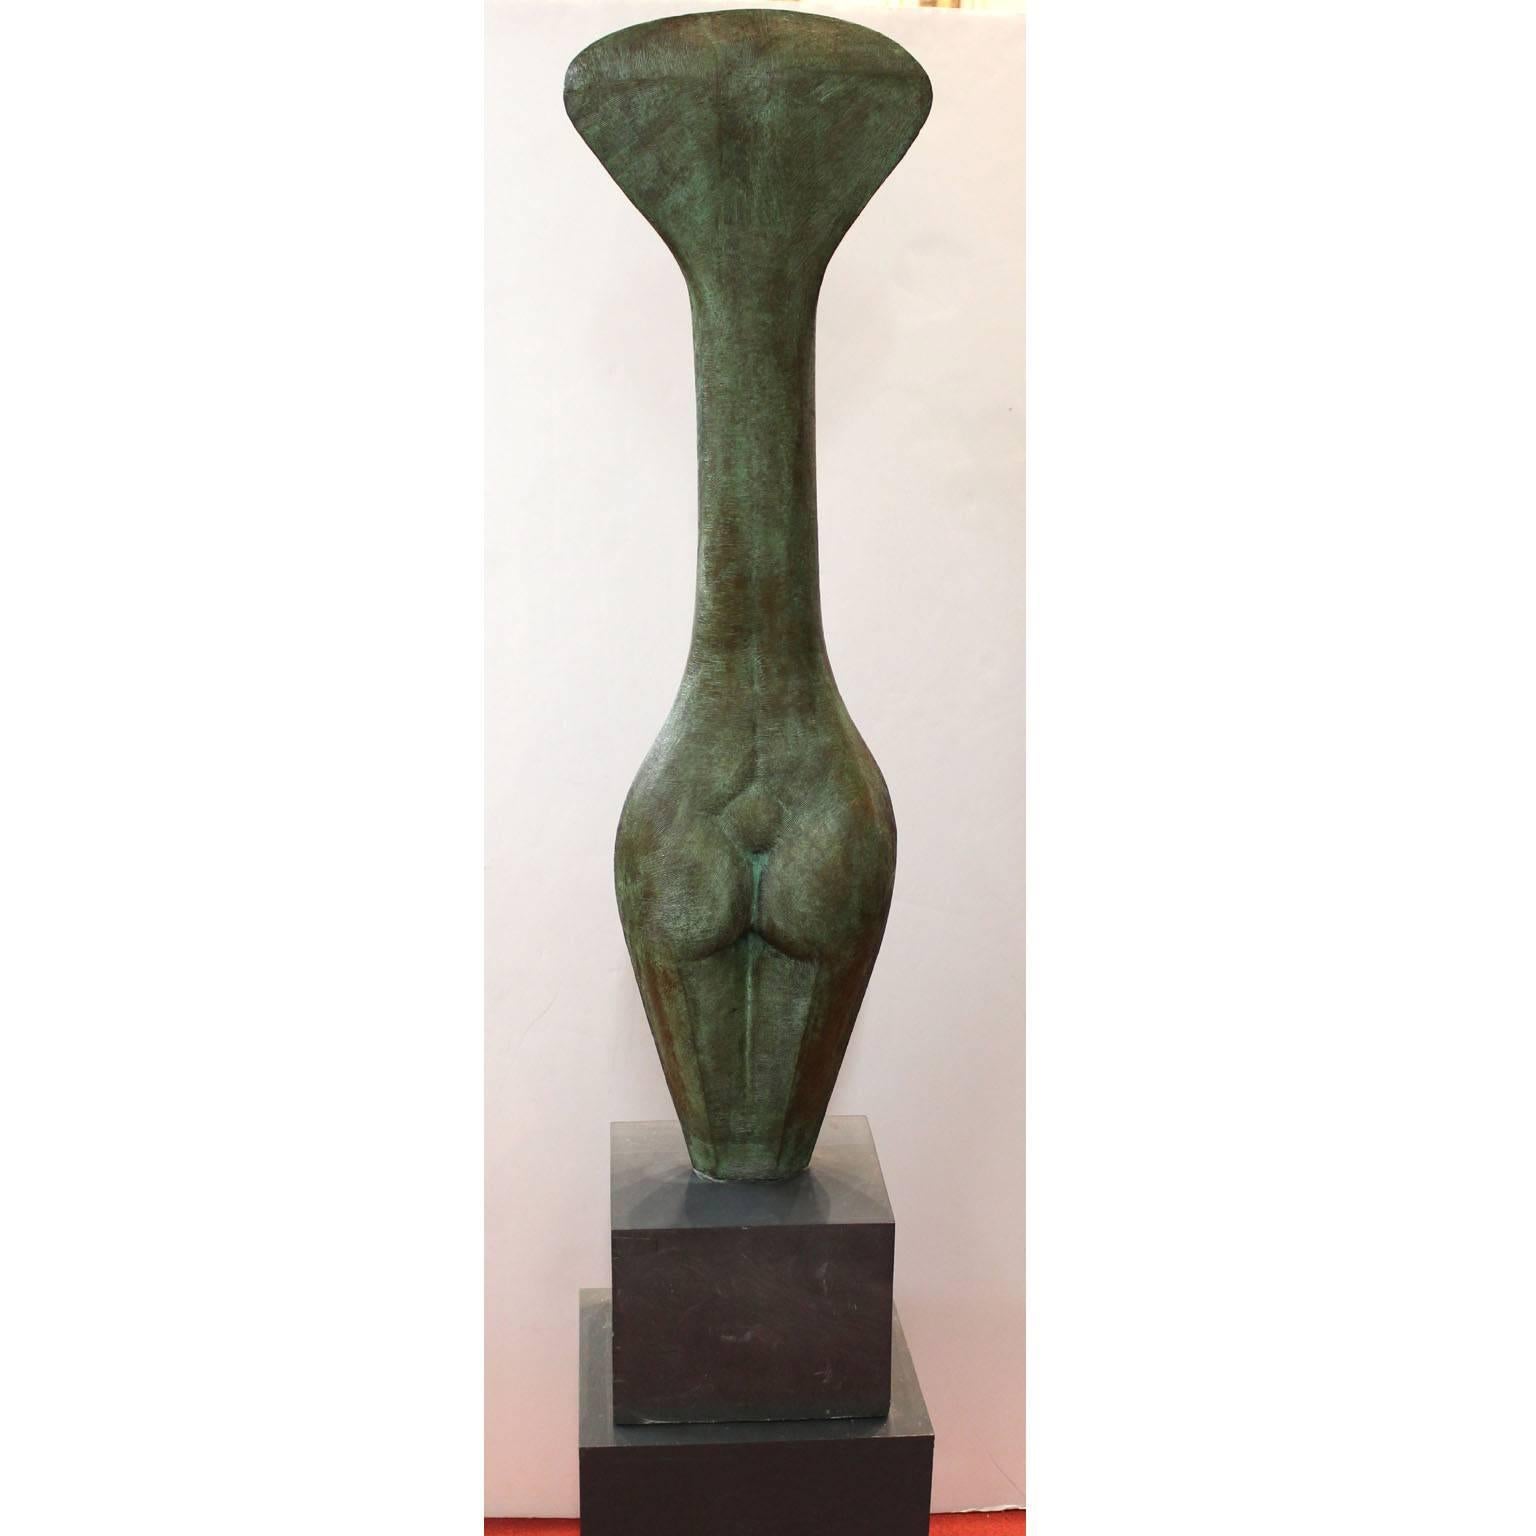 A large Mid-Century Modernist style patinated bronze sculpture of a stylized tall female torso. Artist unknown; unsigned. Very good original condition.